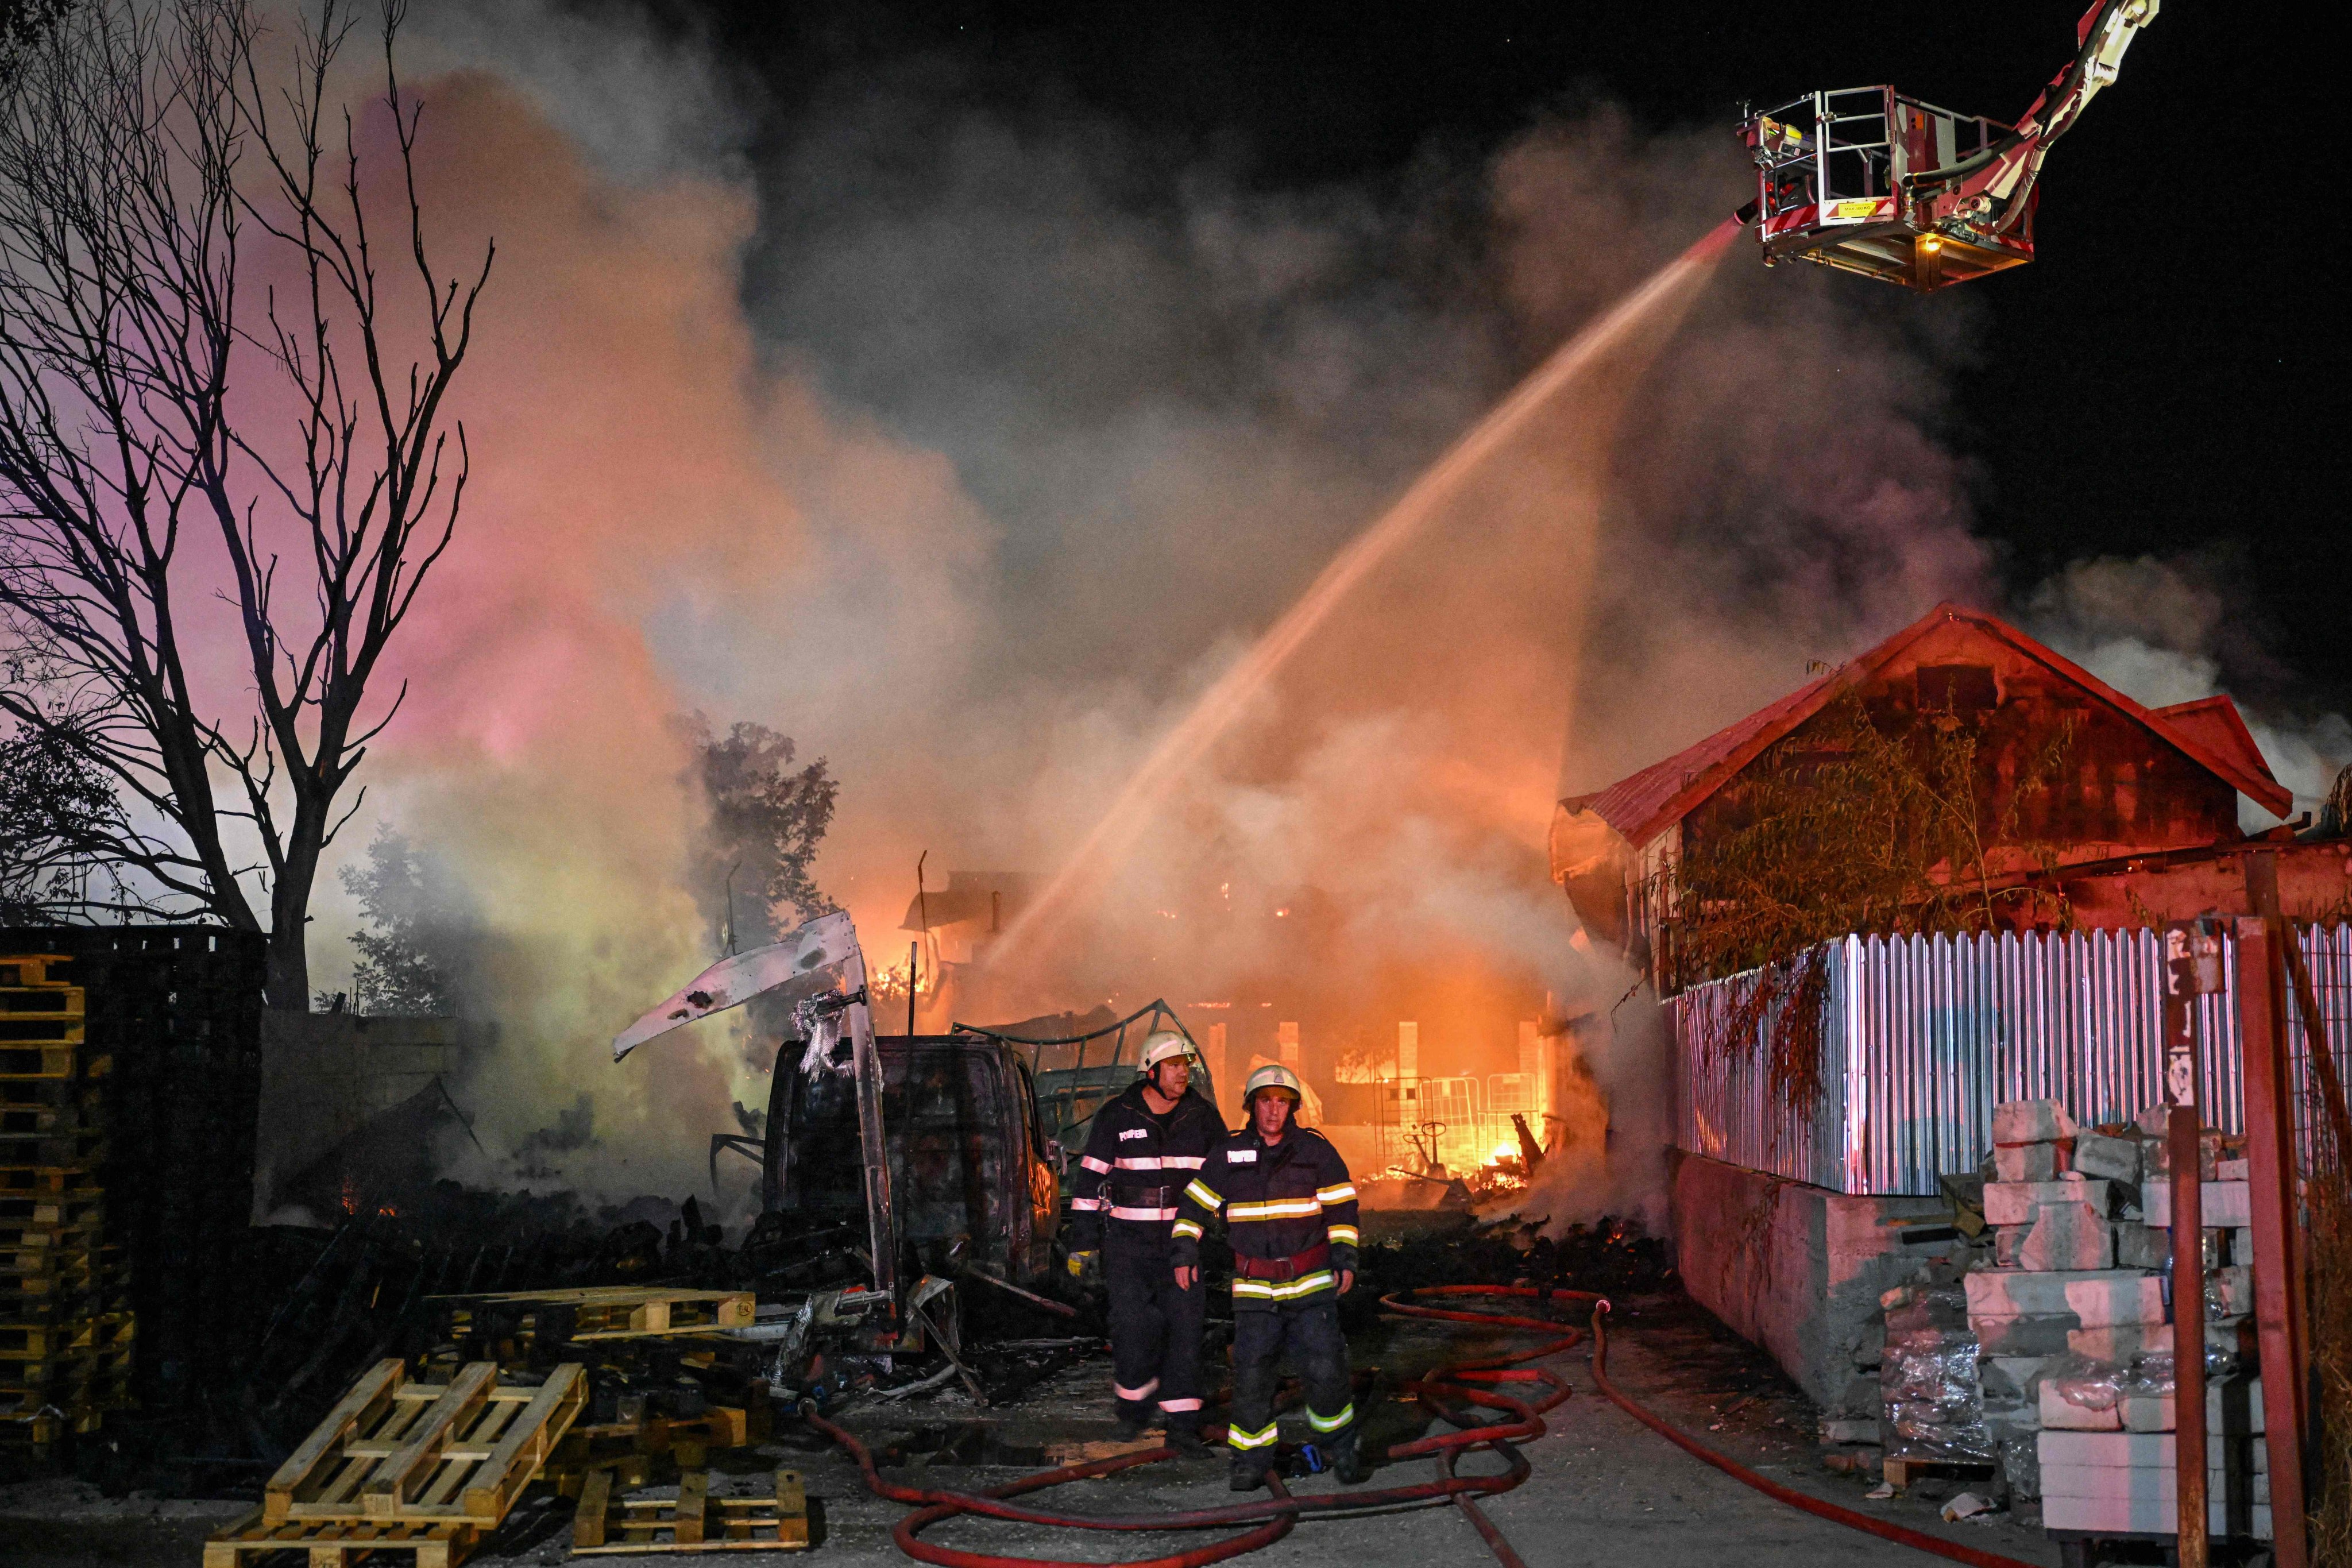 Firefighters attempt to extinguish flames in the village of Crevedia, near Bucharest, Romania early on Sunday. Photo: AFP